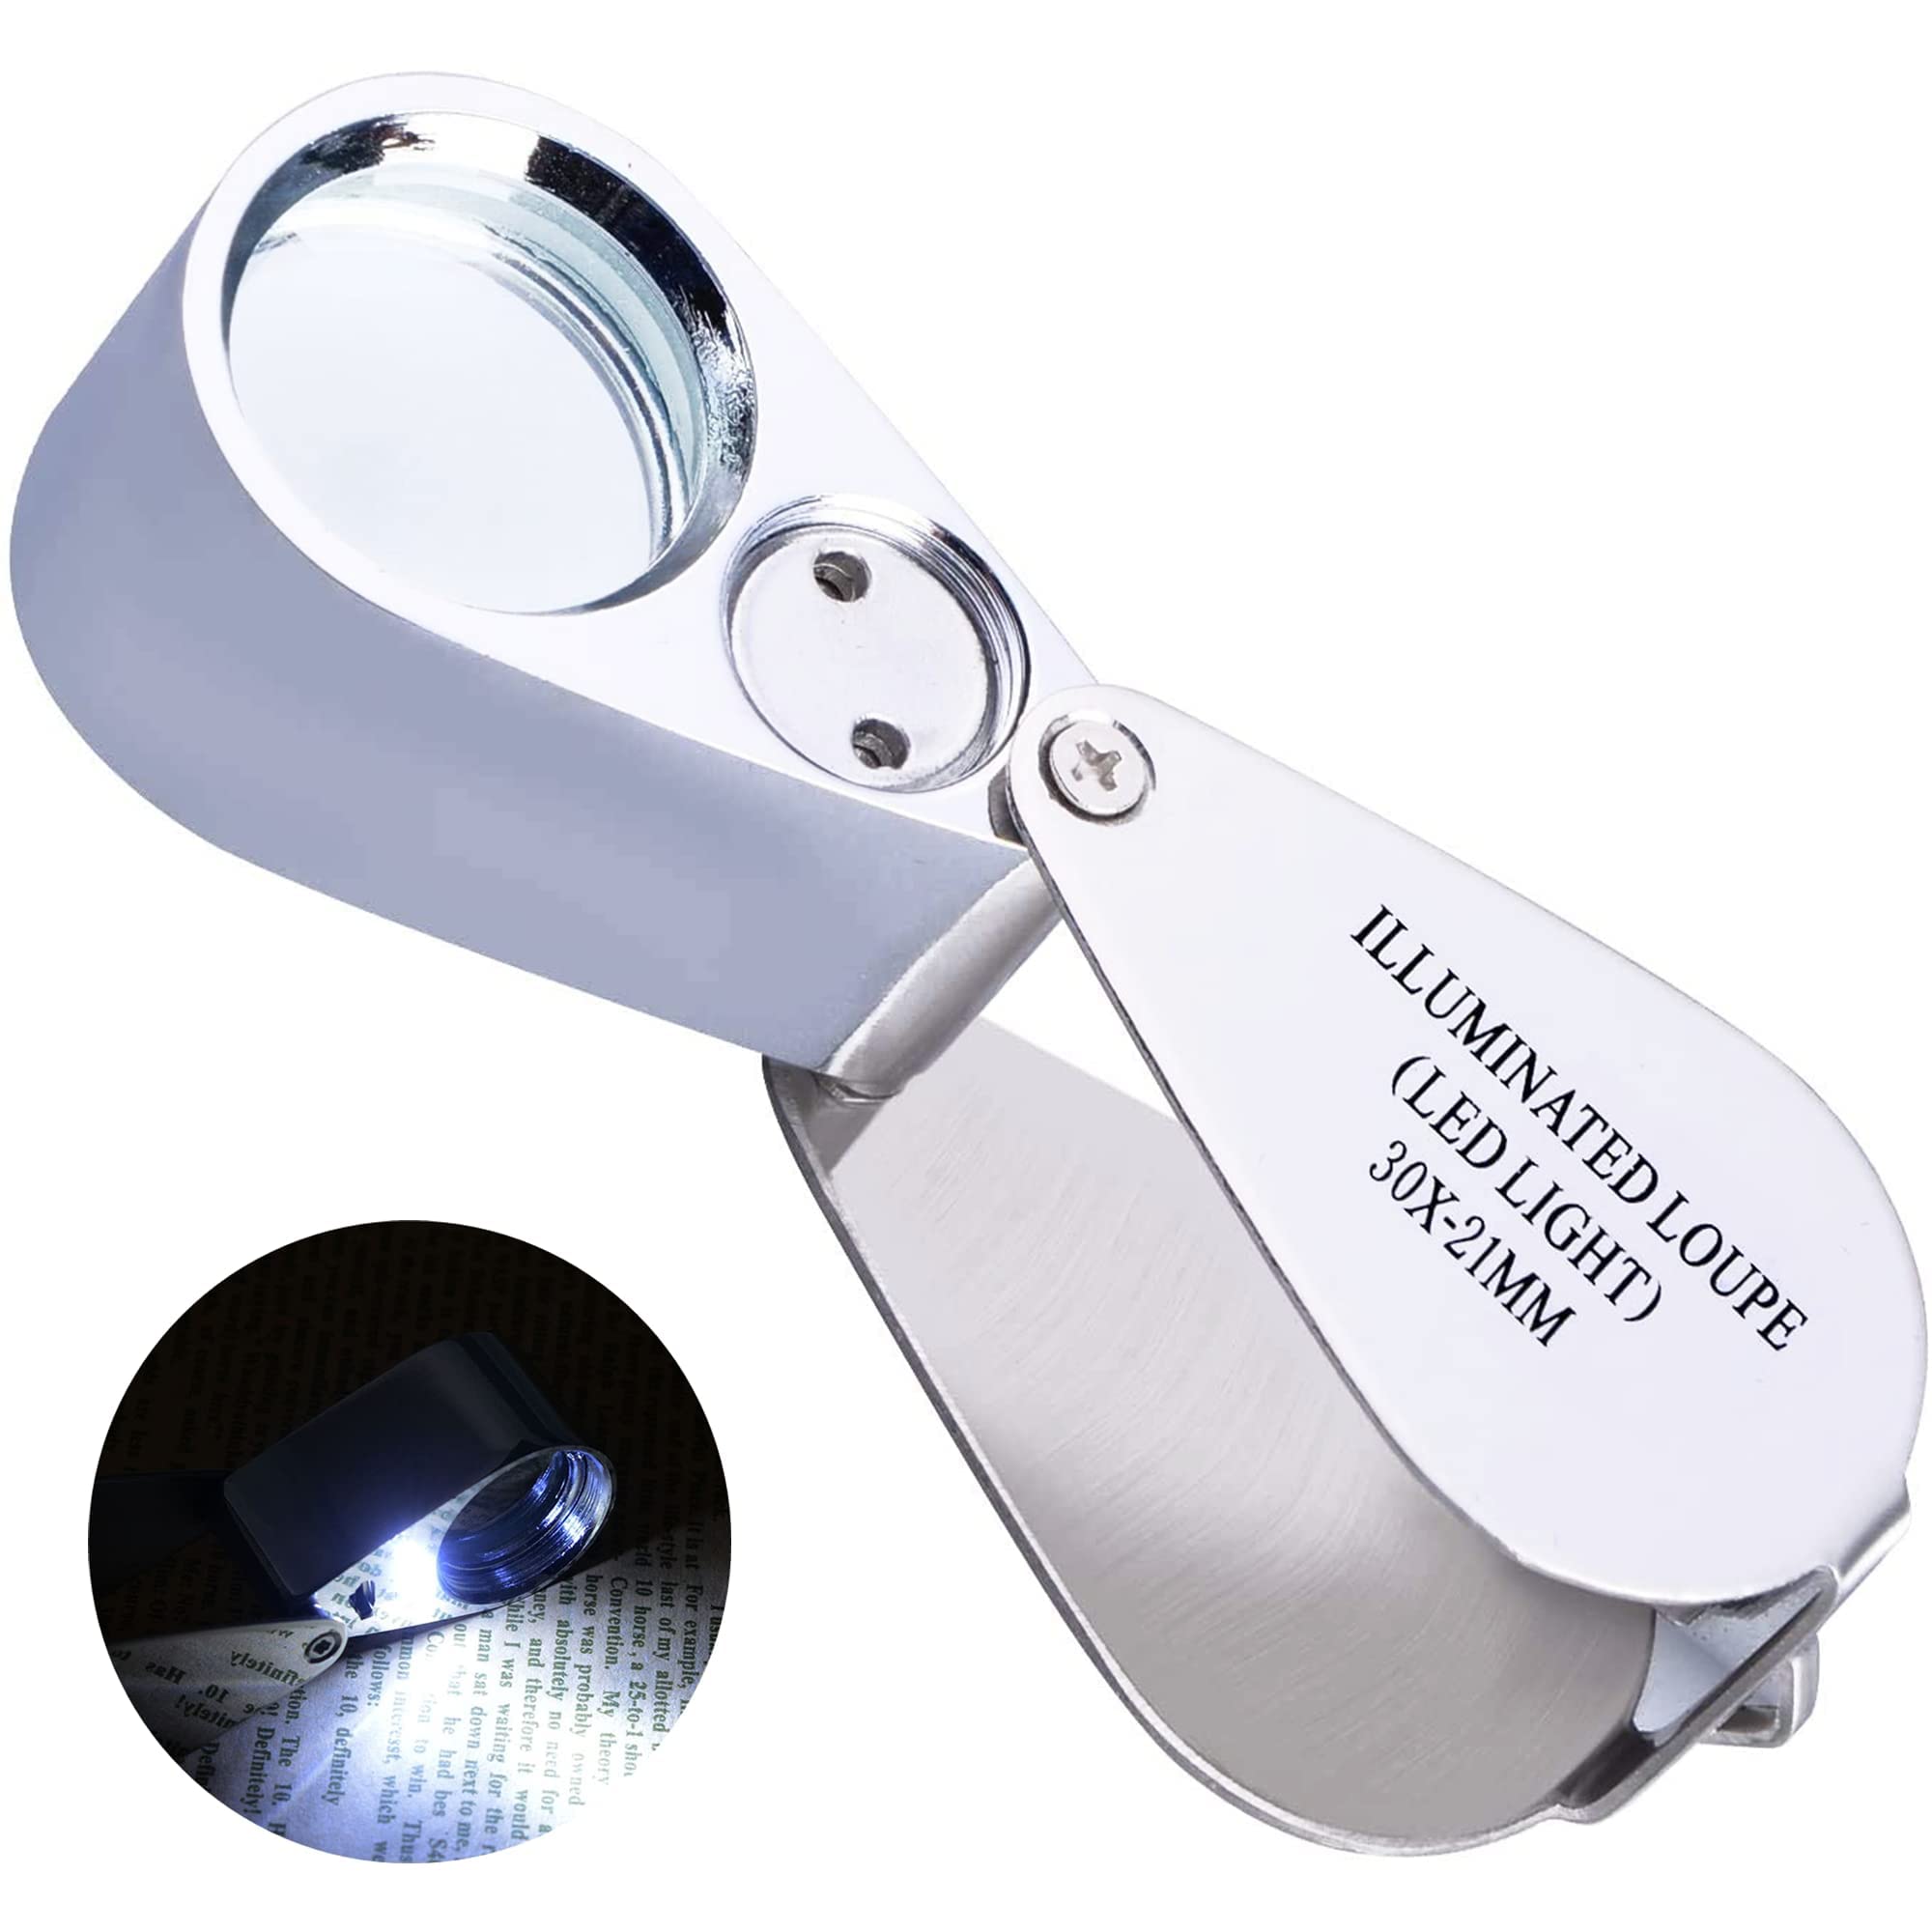 30x21mm Jewelers Eye Loupe Magnifier Magnifying Glass for Jewelry